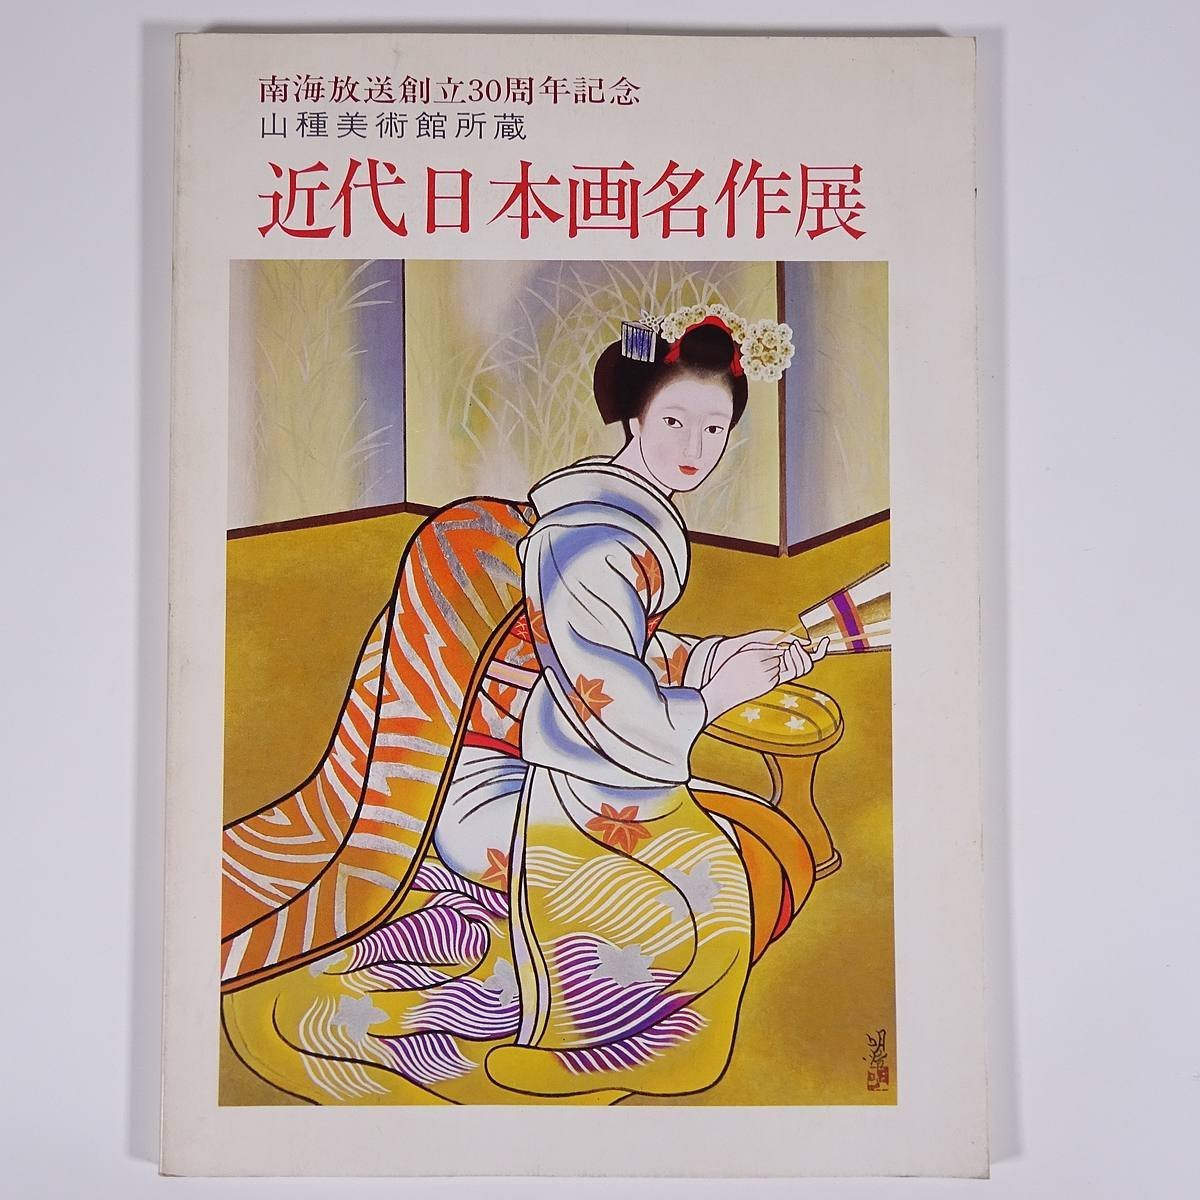 Modern Japanese Painting Masterpieces Exhibition Yamatane Museum of Art Ehime Prefecture Nankai Broadcasting 1983 Large book Exhibition Illustrations Catalog Catalog Art Fine art Painting Art book Collection of works Japanese painting, Painting, Art Book, Collection, Catalog